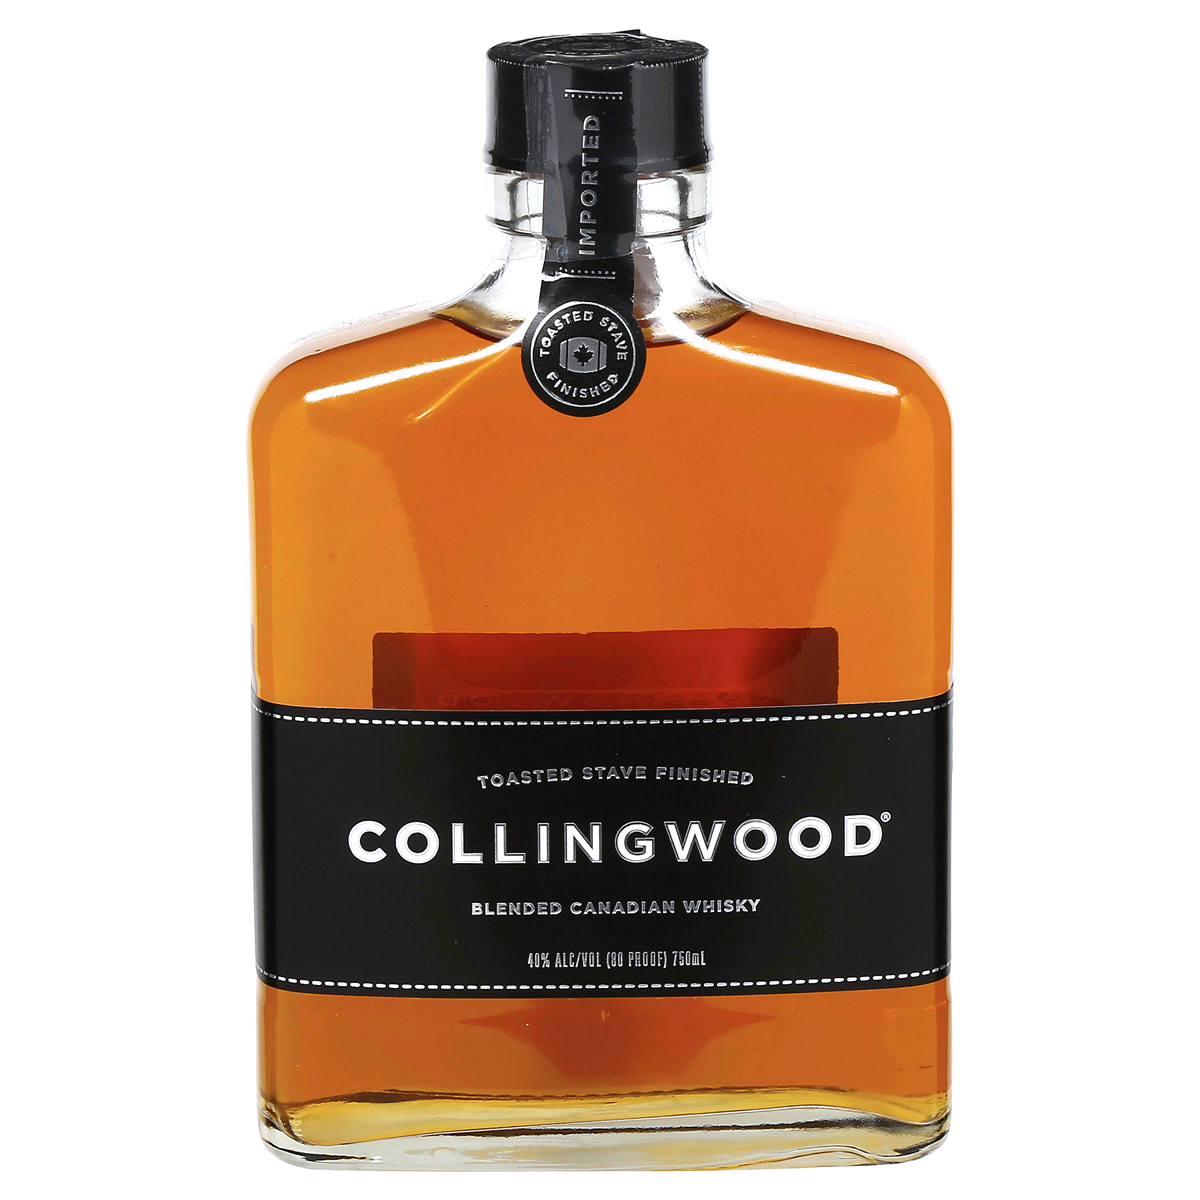 Collingwood Whisky